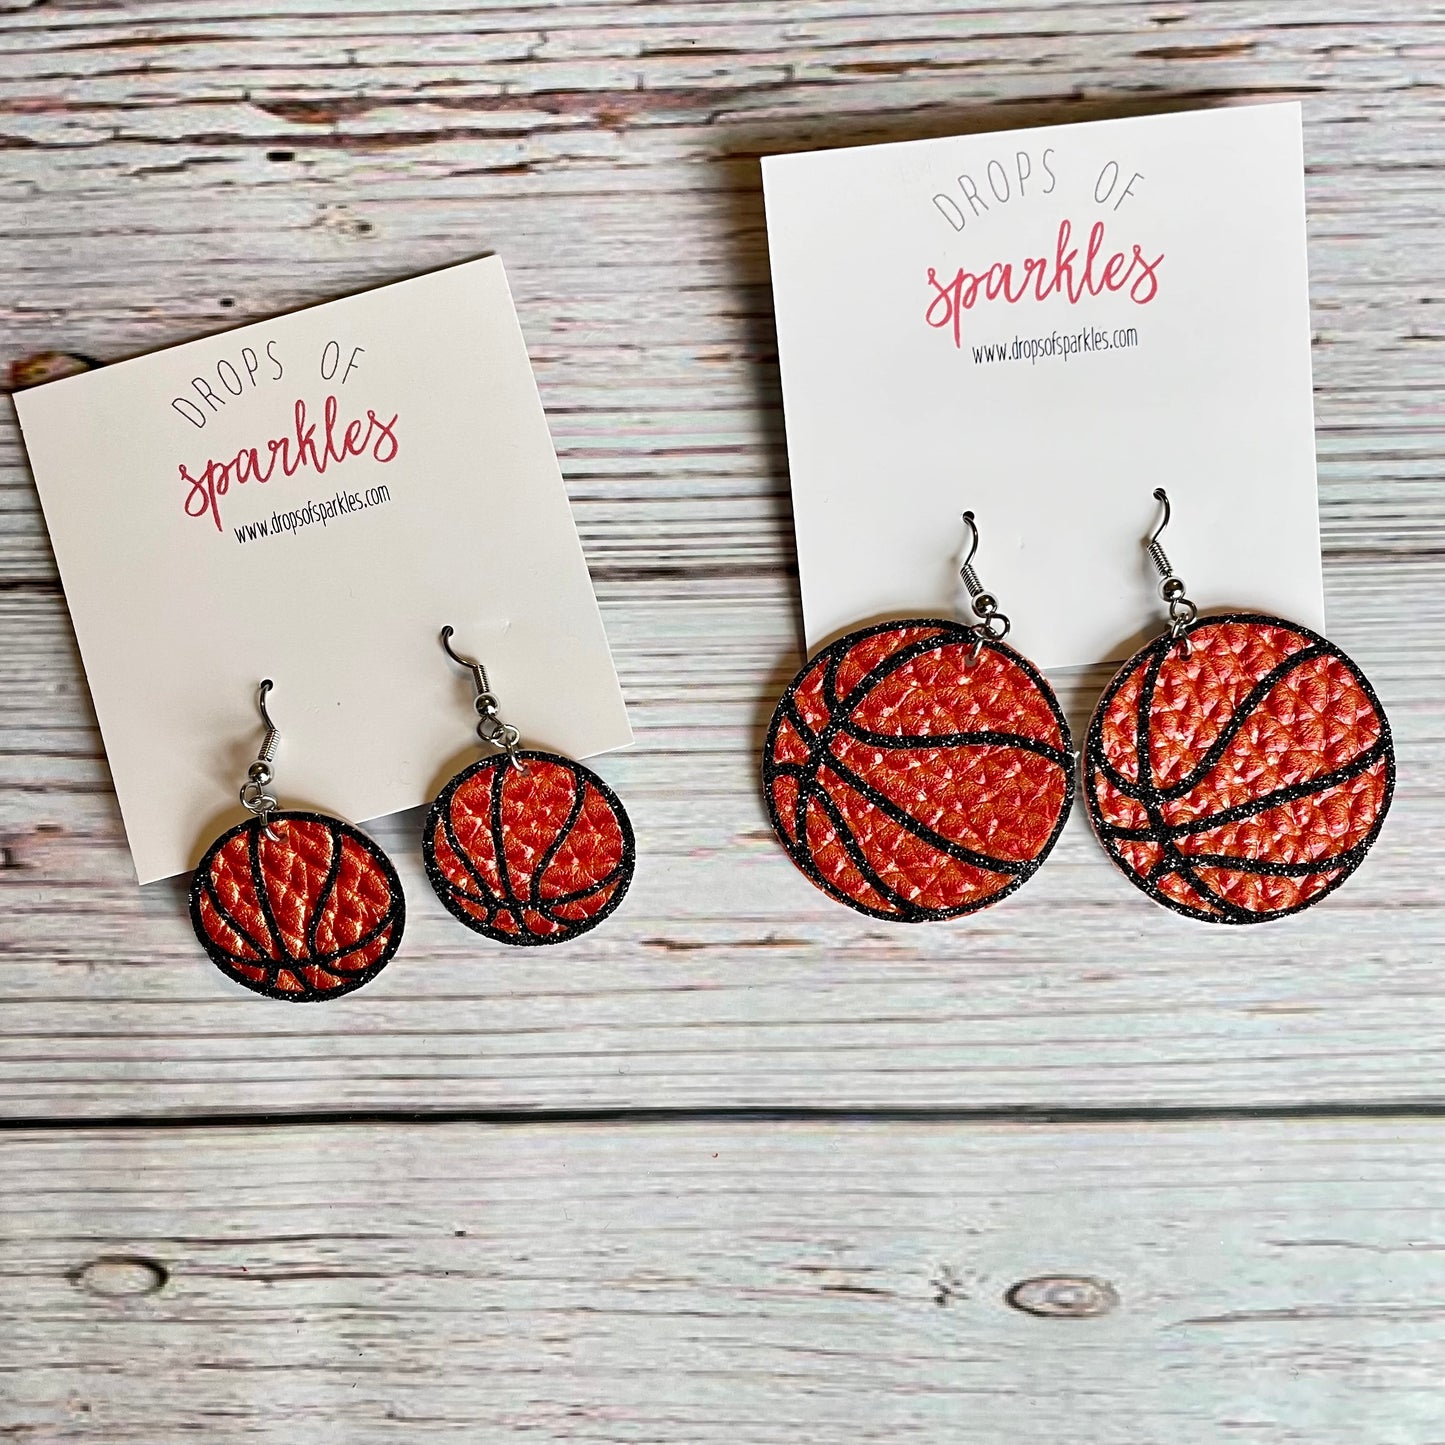 Basketball earrings made of faux orange pebbled leather with black glitter vinyl shown in either 1 inch or 2 inch sizes.